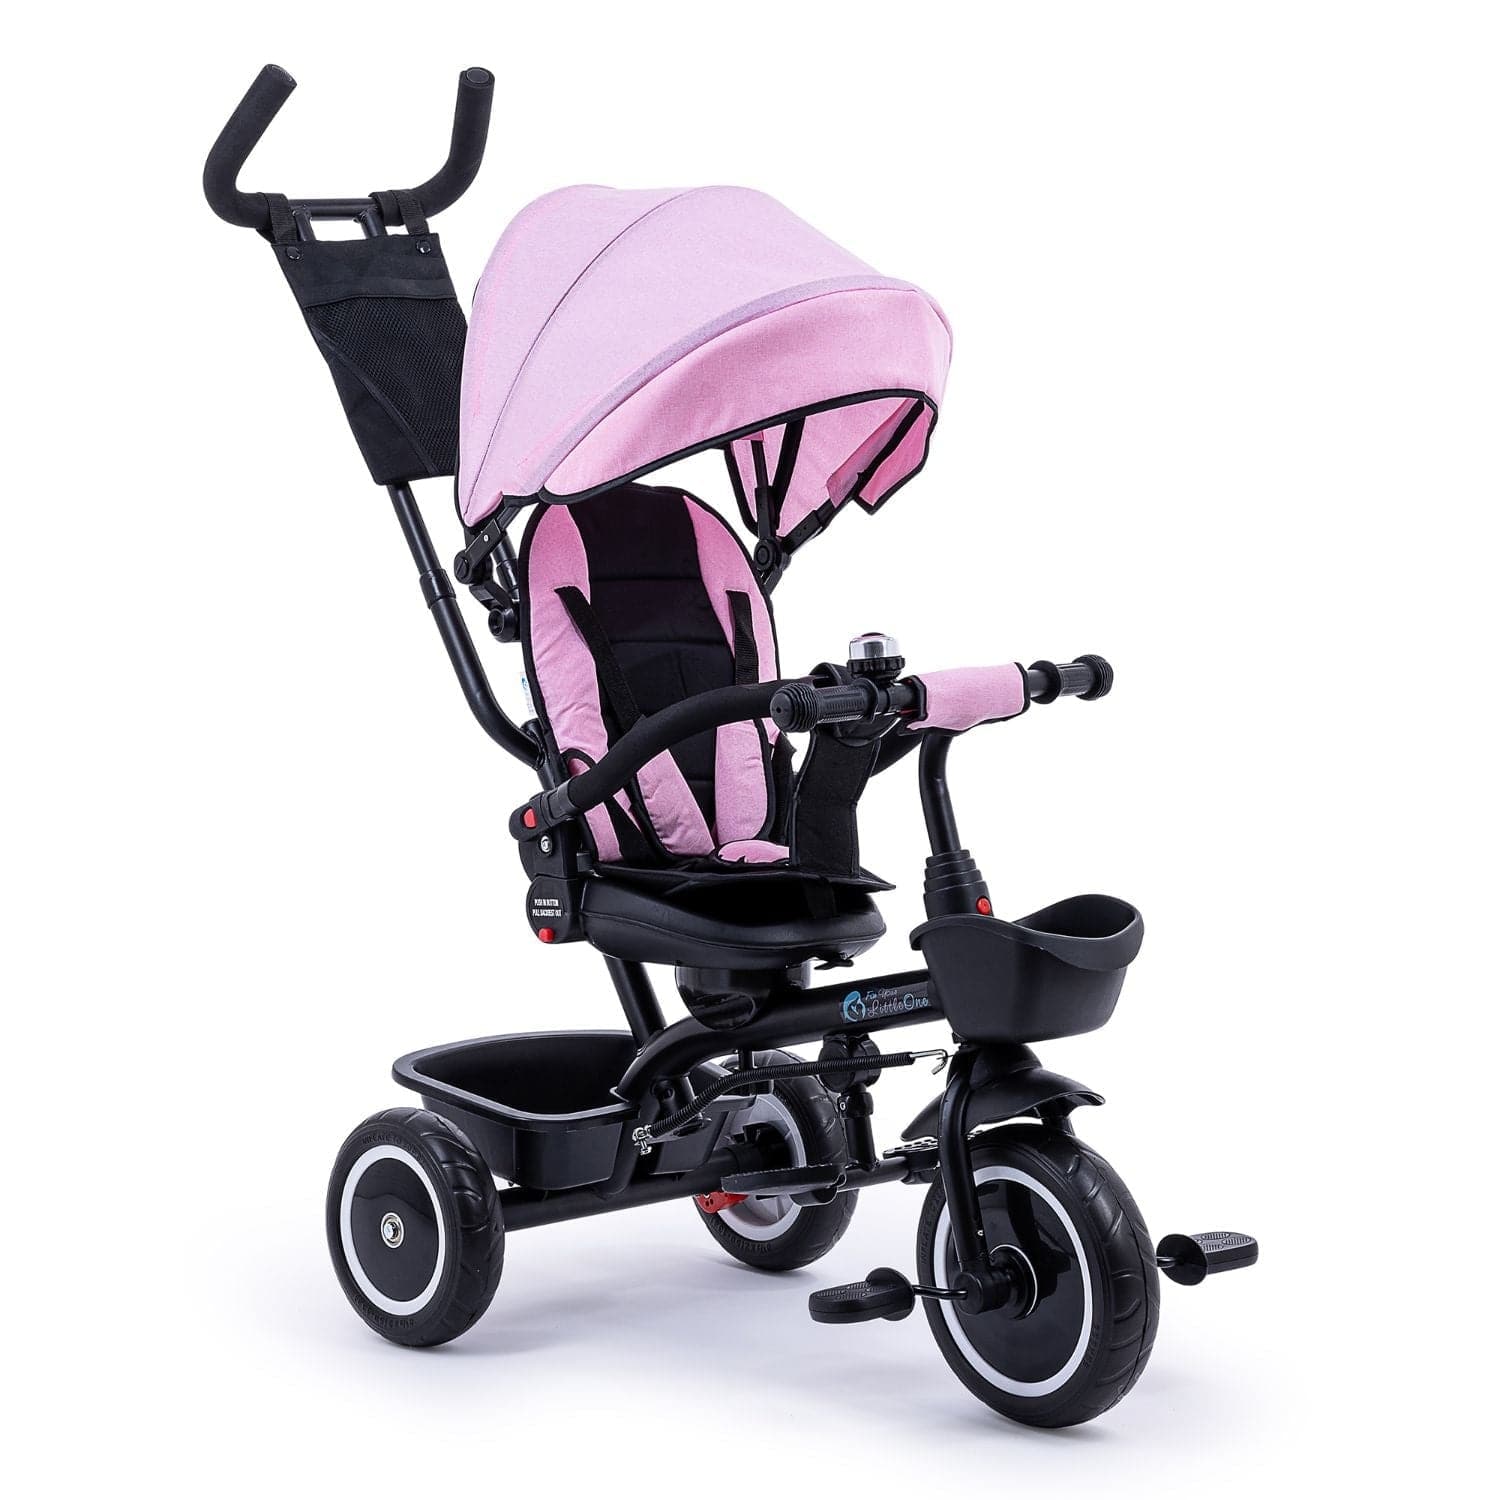 Foryourlittleone Trike V3 - Pink - For Your Little One